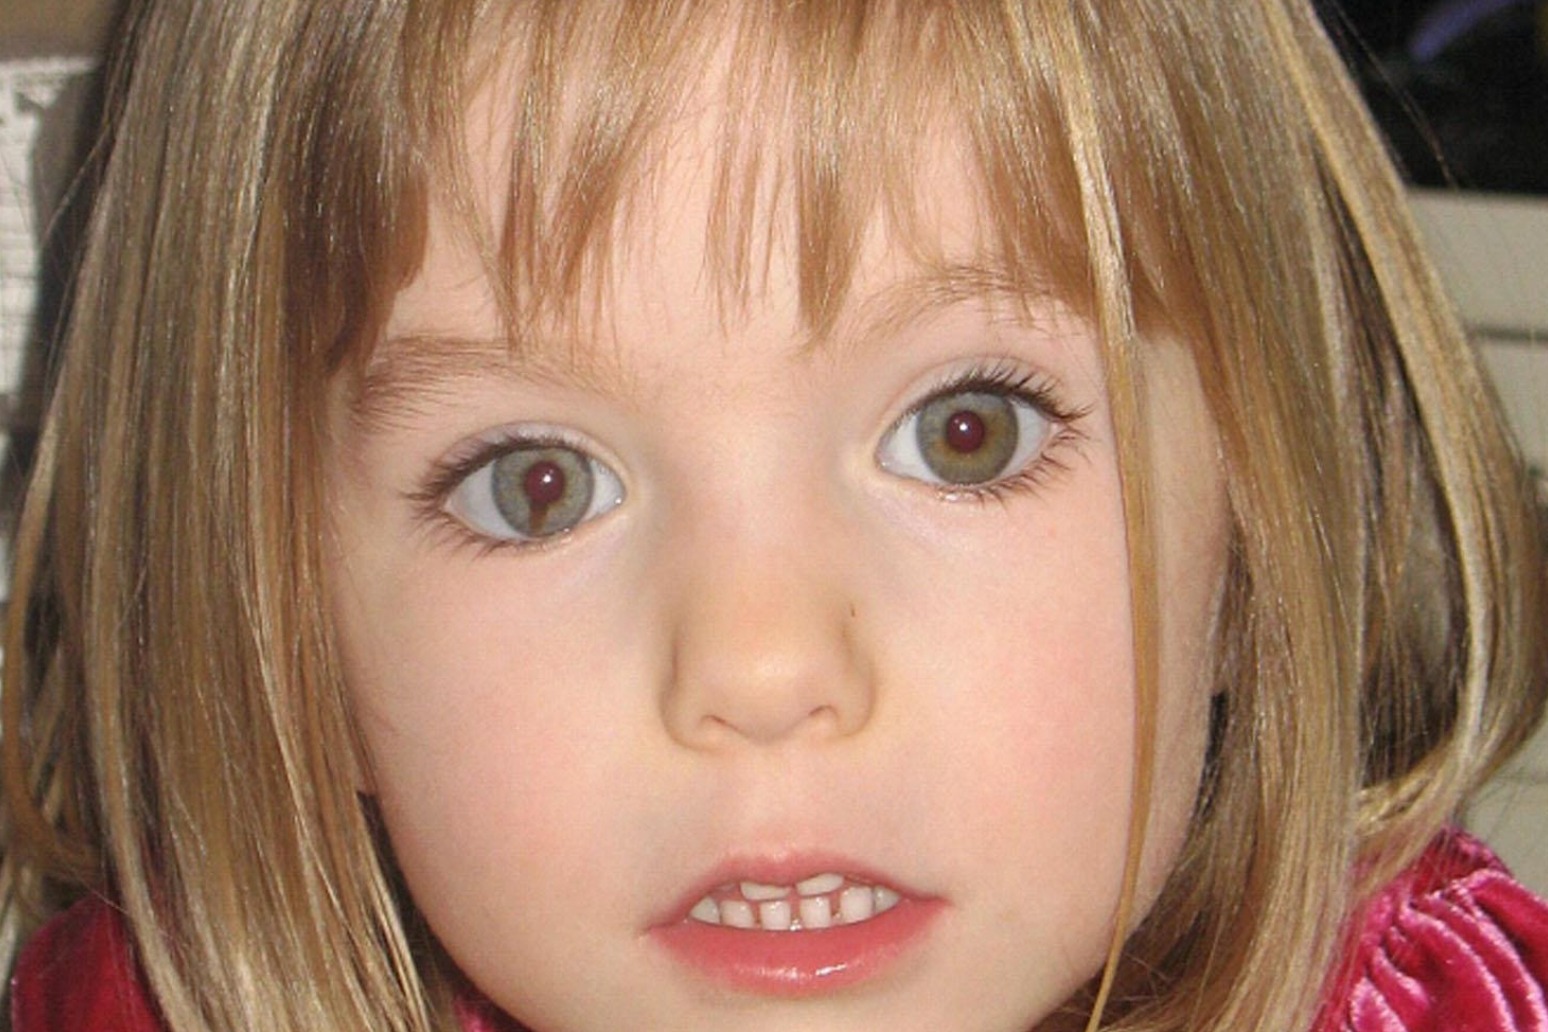 Prime Madeleine McCann suspect charged with separate sex offences 